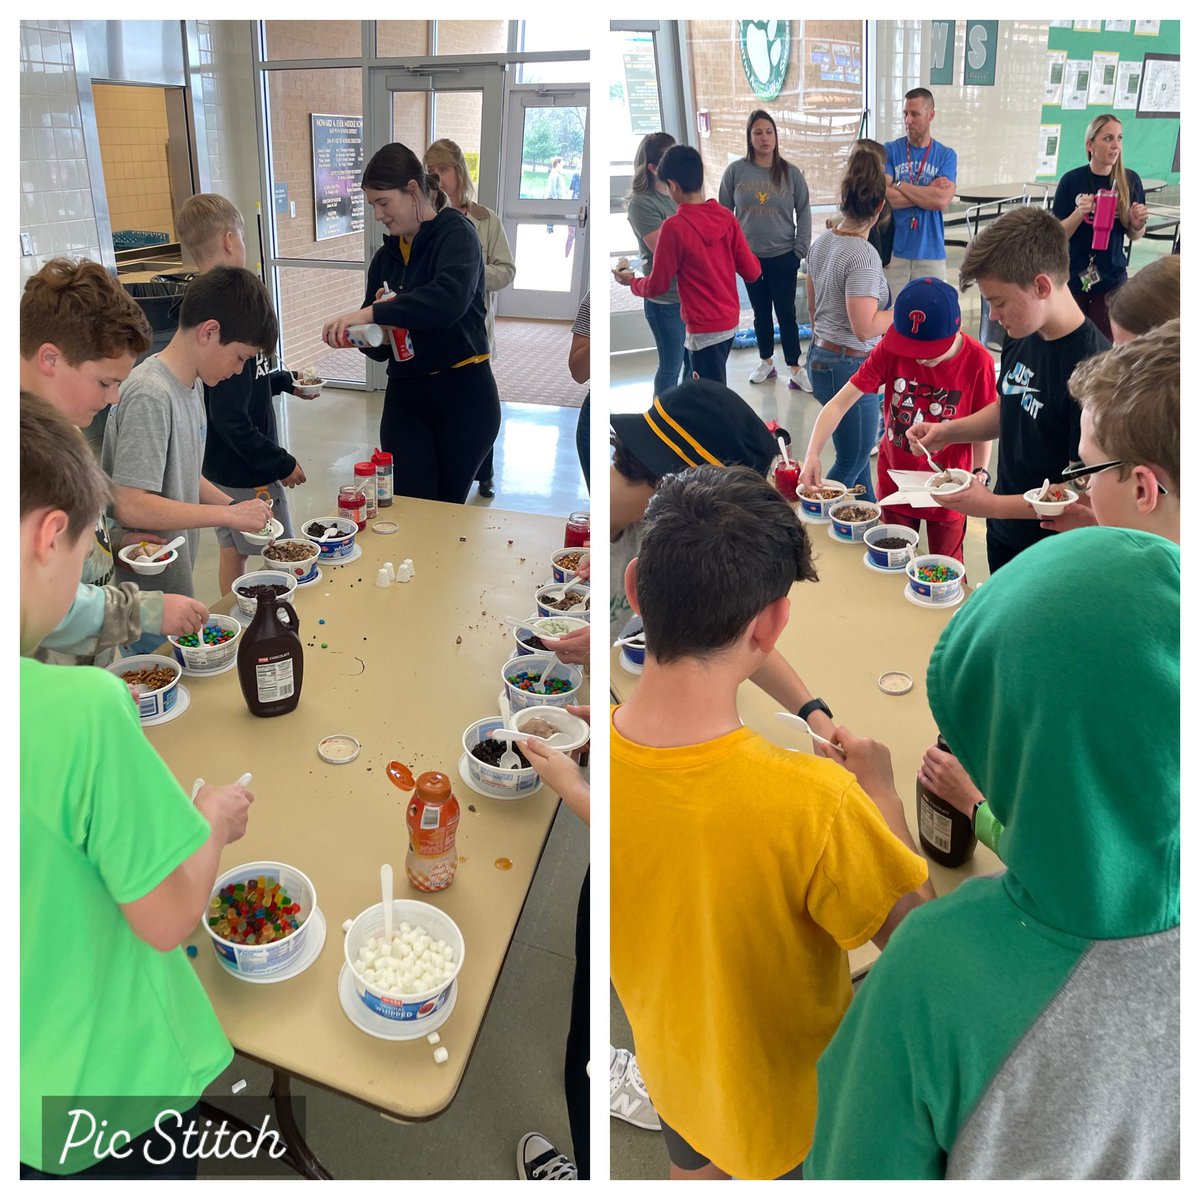 Last week we hosted a reward for top PAWS Program sticker earners. It was a wonderful 9th period filled with ice cream sundaes and sunshine! Special thanks to the Related Arts Team for their help and our parent volunteers for scooping all the ice cream! #OneEyer #EastPennPROUD